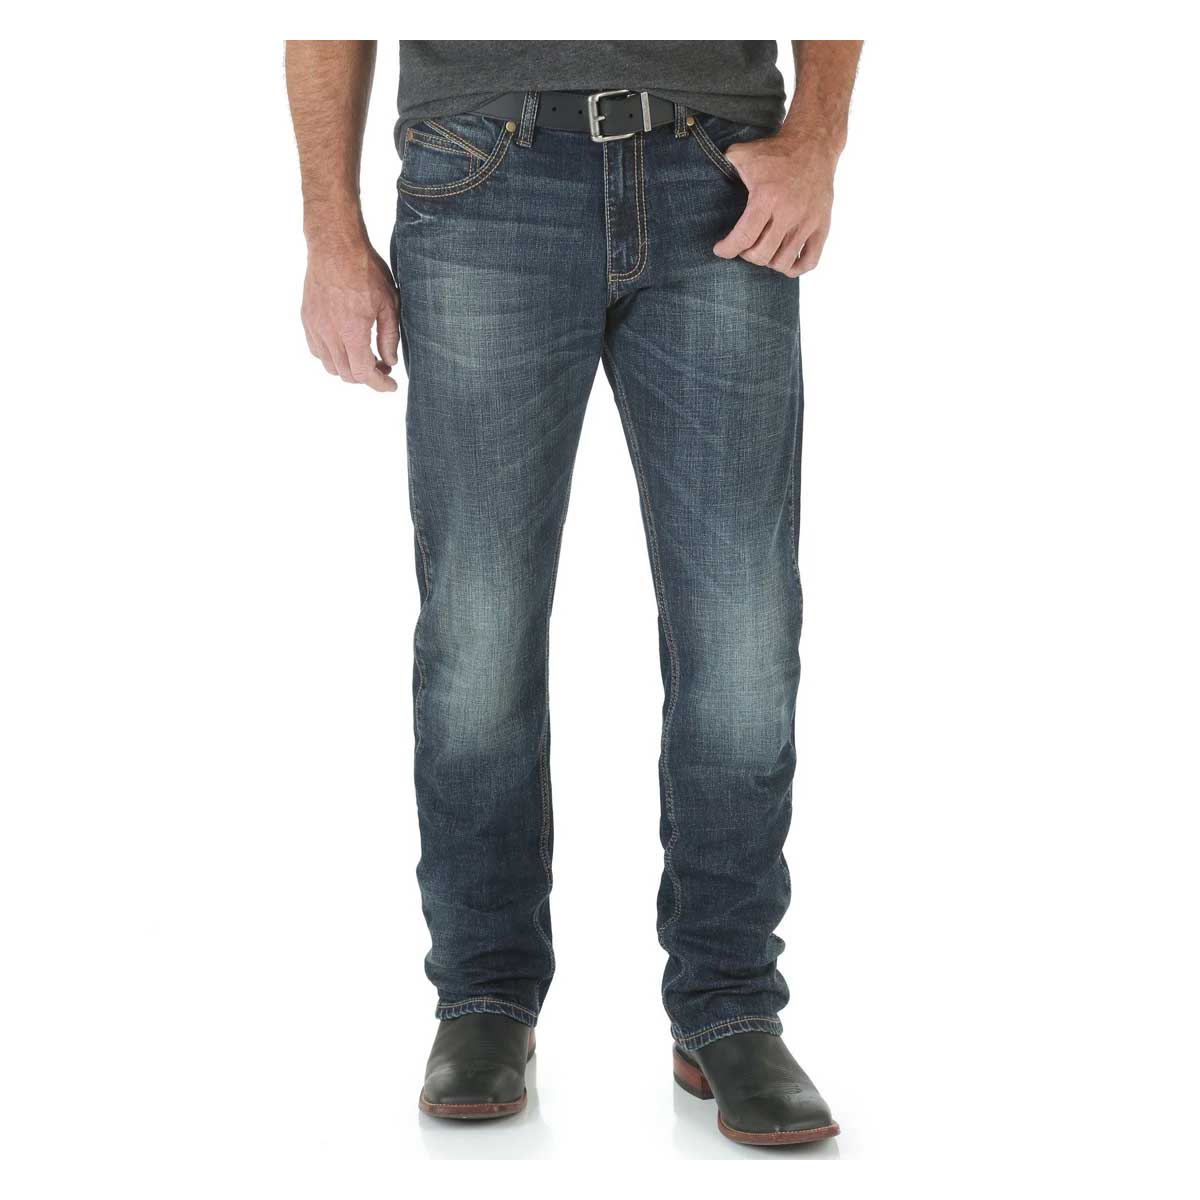 wrangler rock and roll jeans